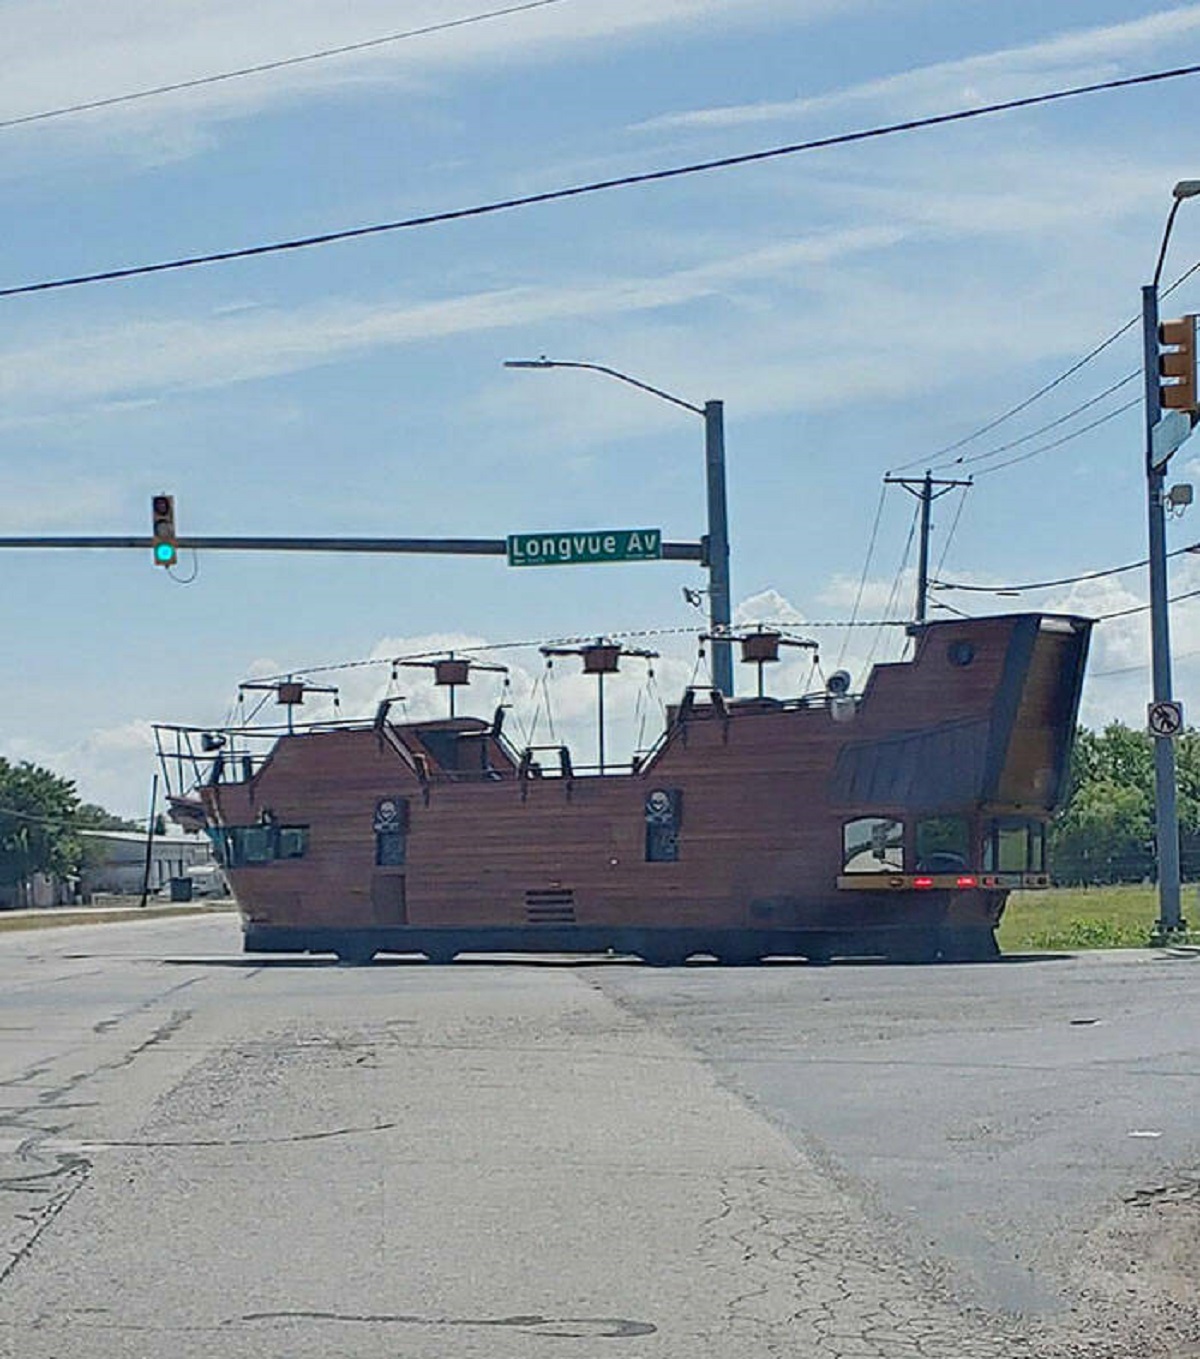 pirate ship driving on road